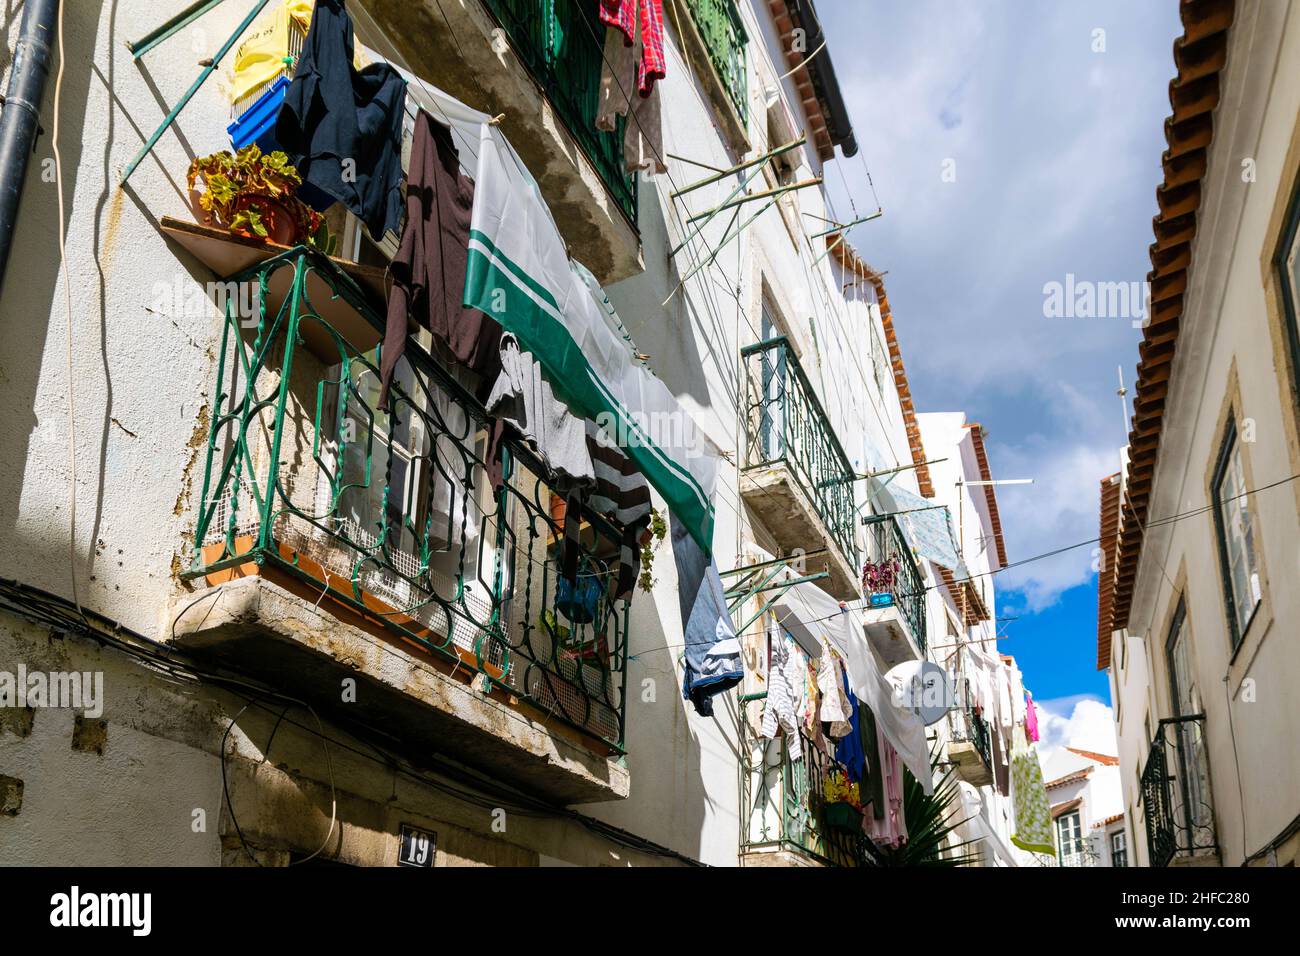 Lots of clothes hanging from balconies in the narrow streets of Alfama district, Lisbon, Portugal. Typical traditional simple way of life in the old Stock Photo